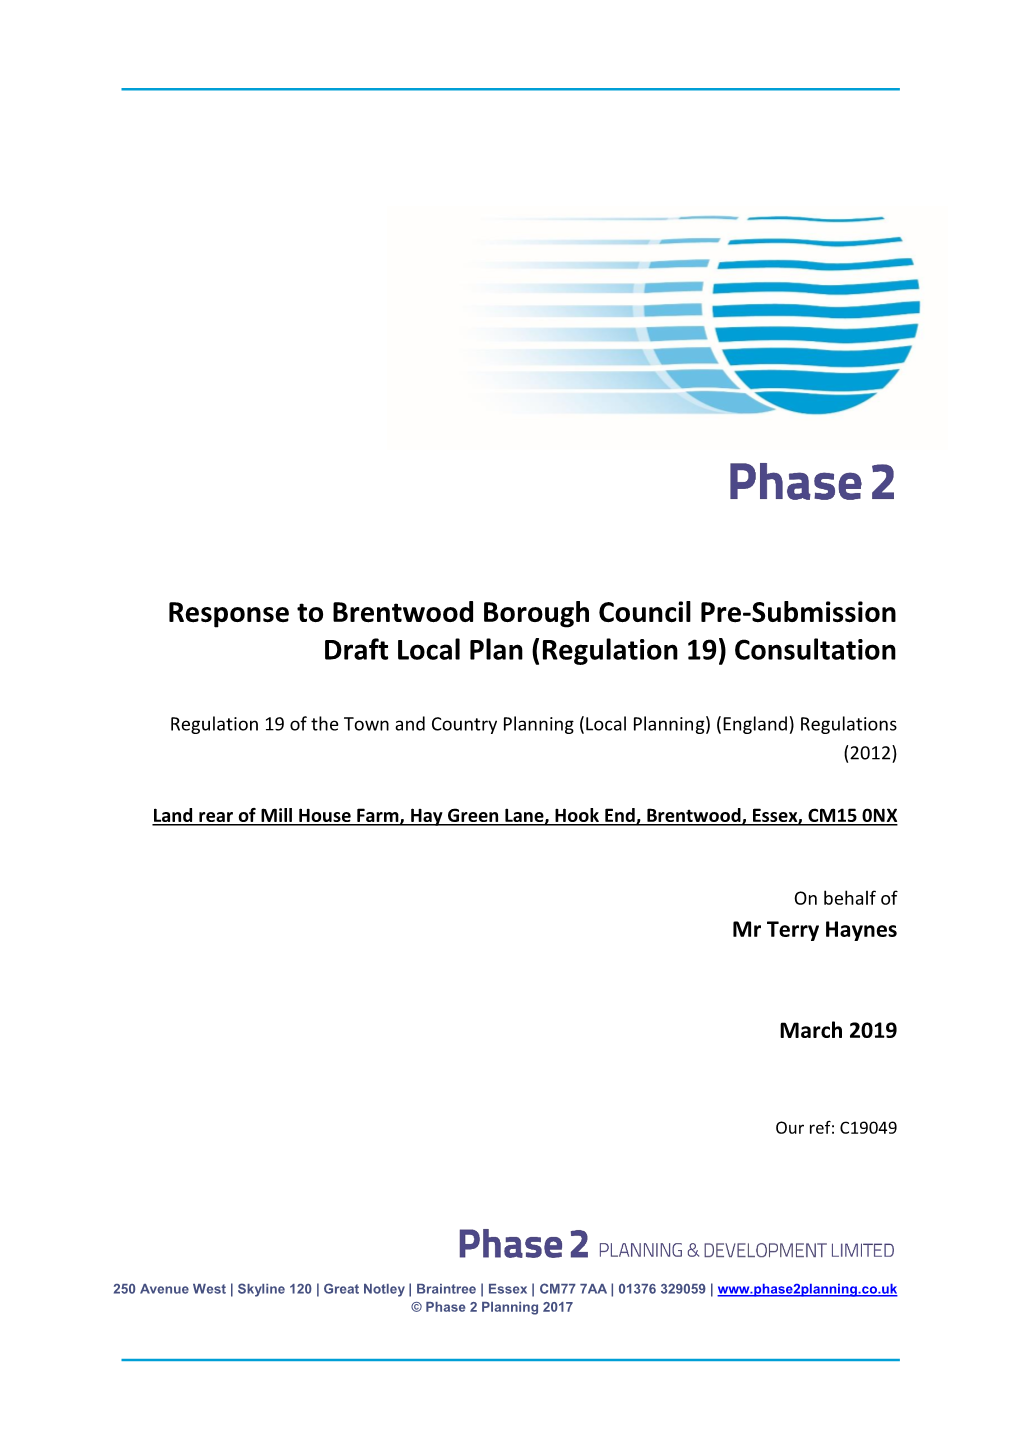 Response to Brentwood Borough Council Pre-Submission Draft Local Plan (Regulation 19) Consultation